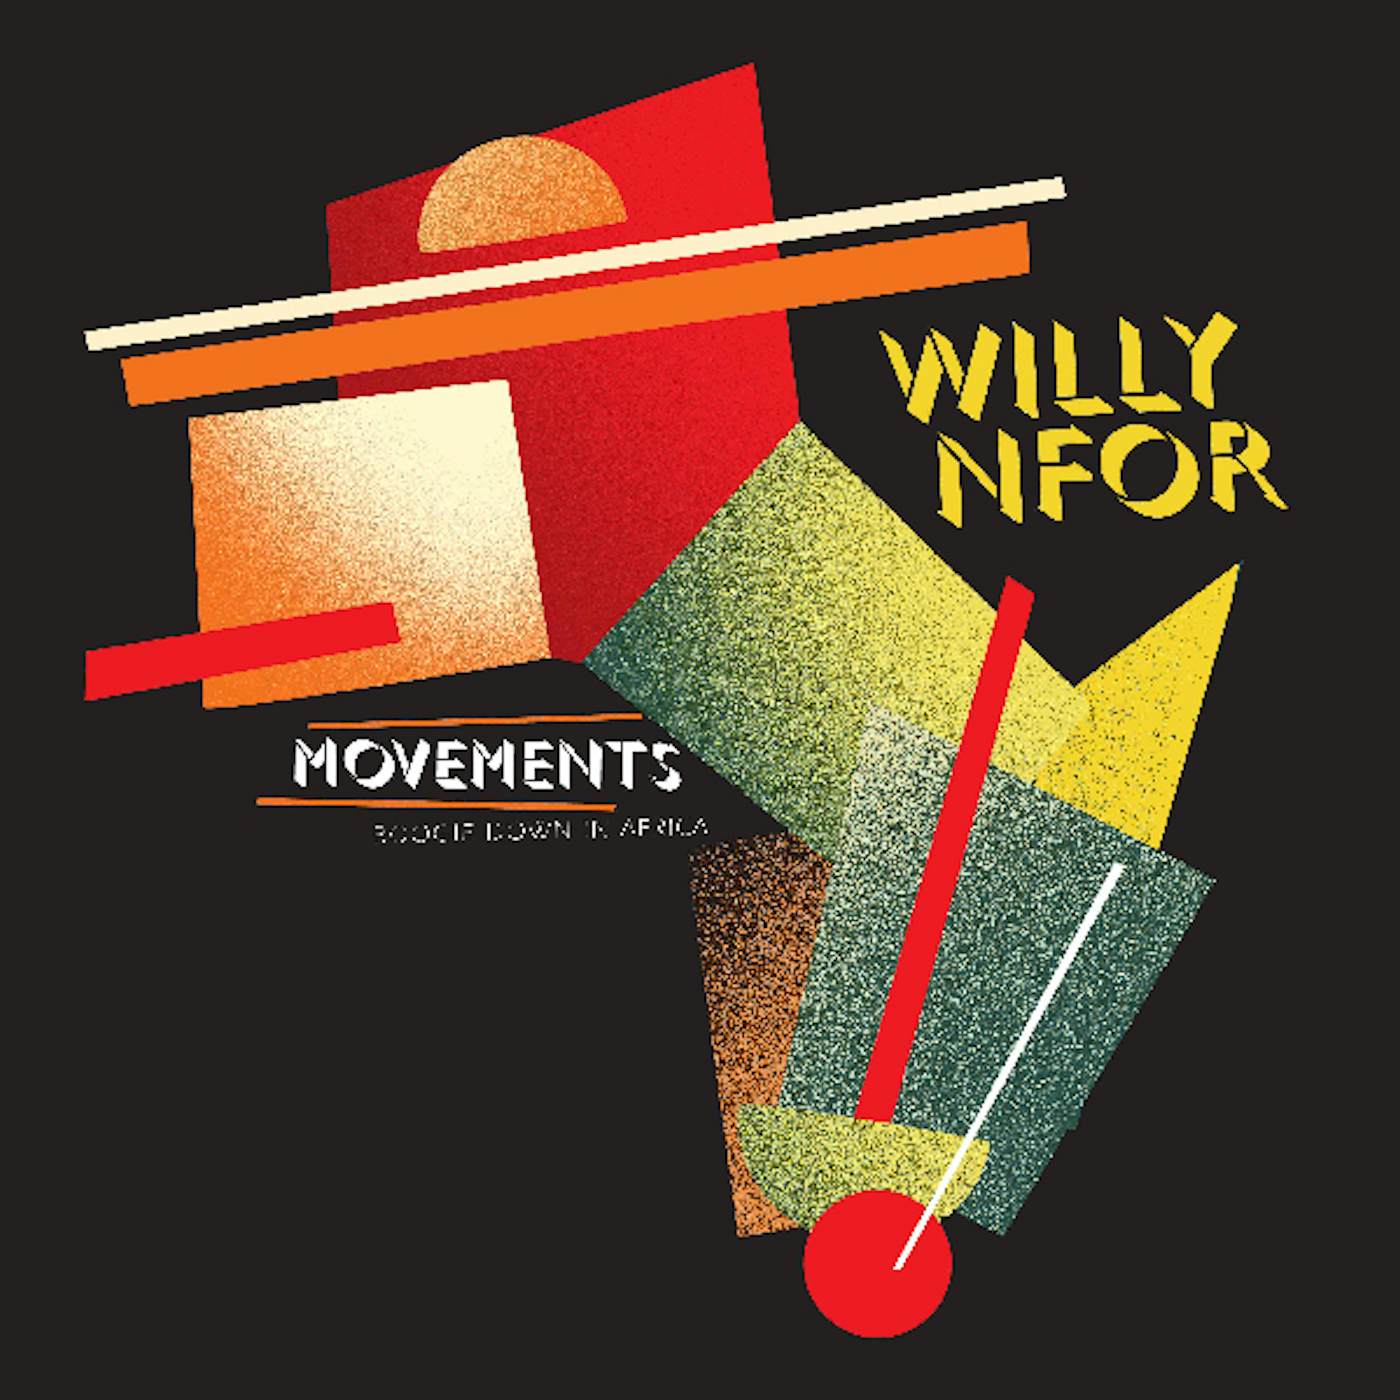 Willy NFor MOVEMENTS: BOOGIE DOWN IN AFRICA Vinyl Record